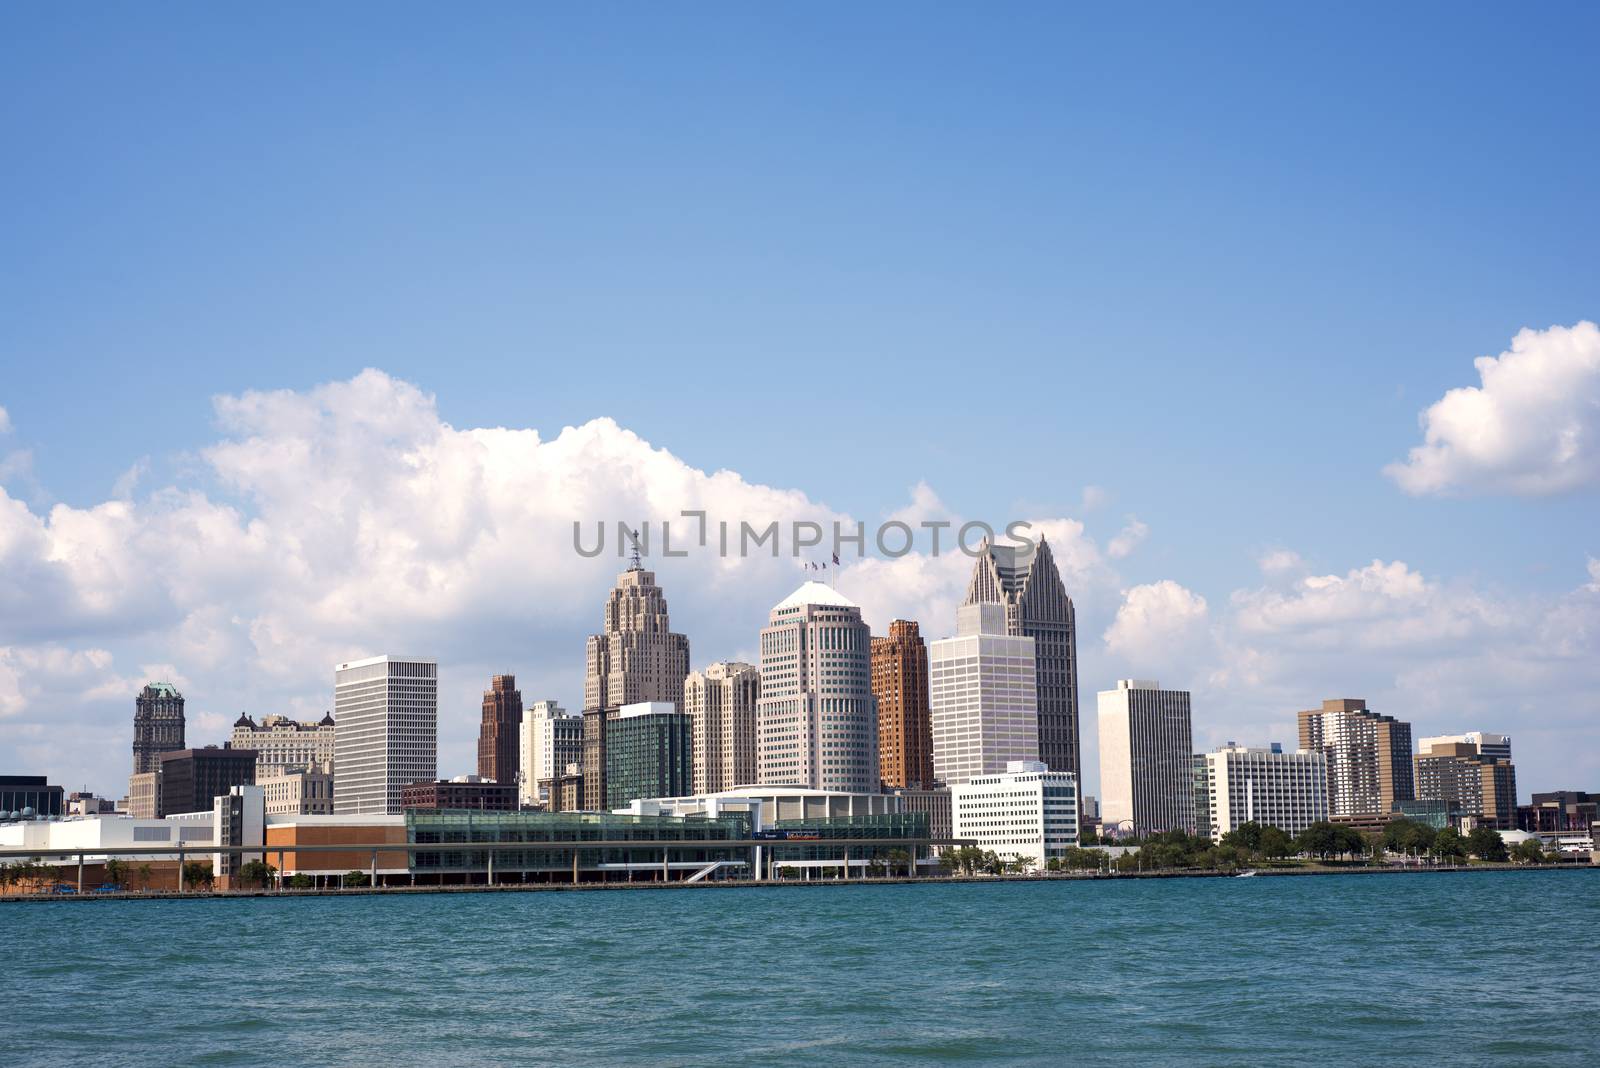 Skyline of downtown Detroit from Windsor, Ontario by rgbspace